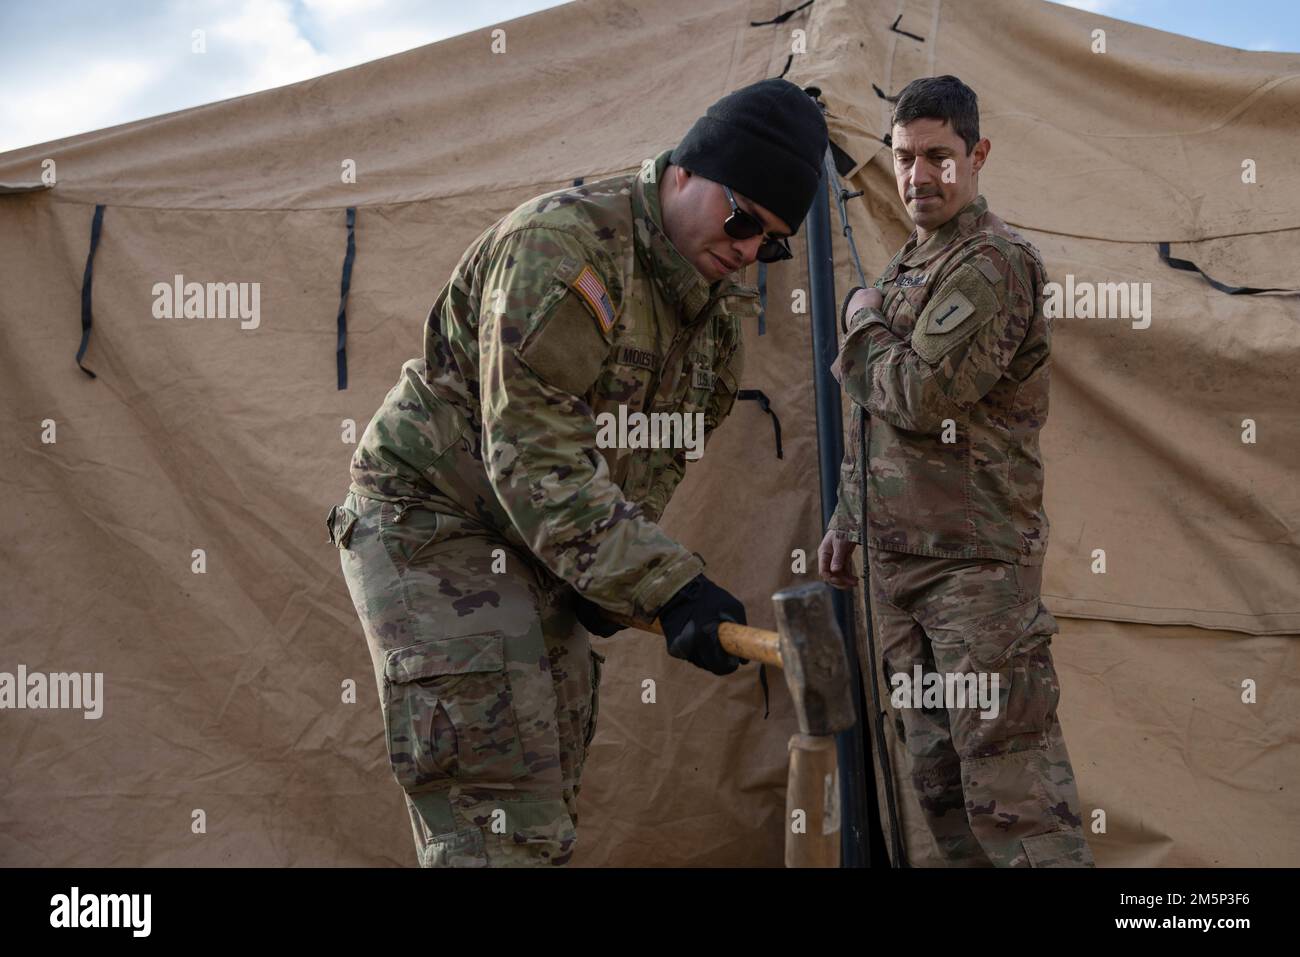 Capt. Scott Leduc, a physician’s assistant, and Spc. Pedro Modesto, a combat medic, both of whom are assigned to 2nd Battalion, 34th Armored Regiment, 1st Armored Brigade Combat Team, 1st Infantry Division, set up an aid station tent, Feb. 27, at Hradiště Military Area in Northwest Czech Republic. The 2/34th is preparing for two weeks of rigorous training as part of Saber Strike 22, a large scale, multi-national exercise taking place throughout Europe to enhance readiness and relationships between NATO allies in the U.S. Army Europe region. Stock Photo